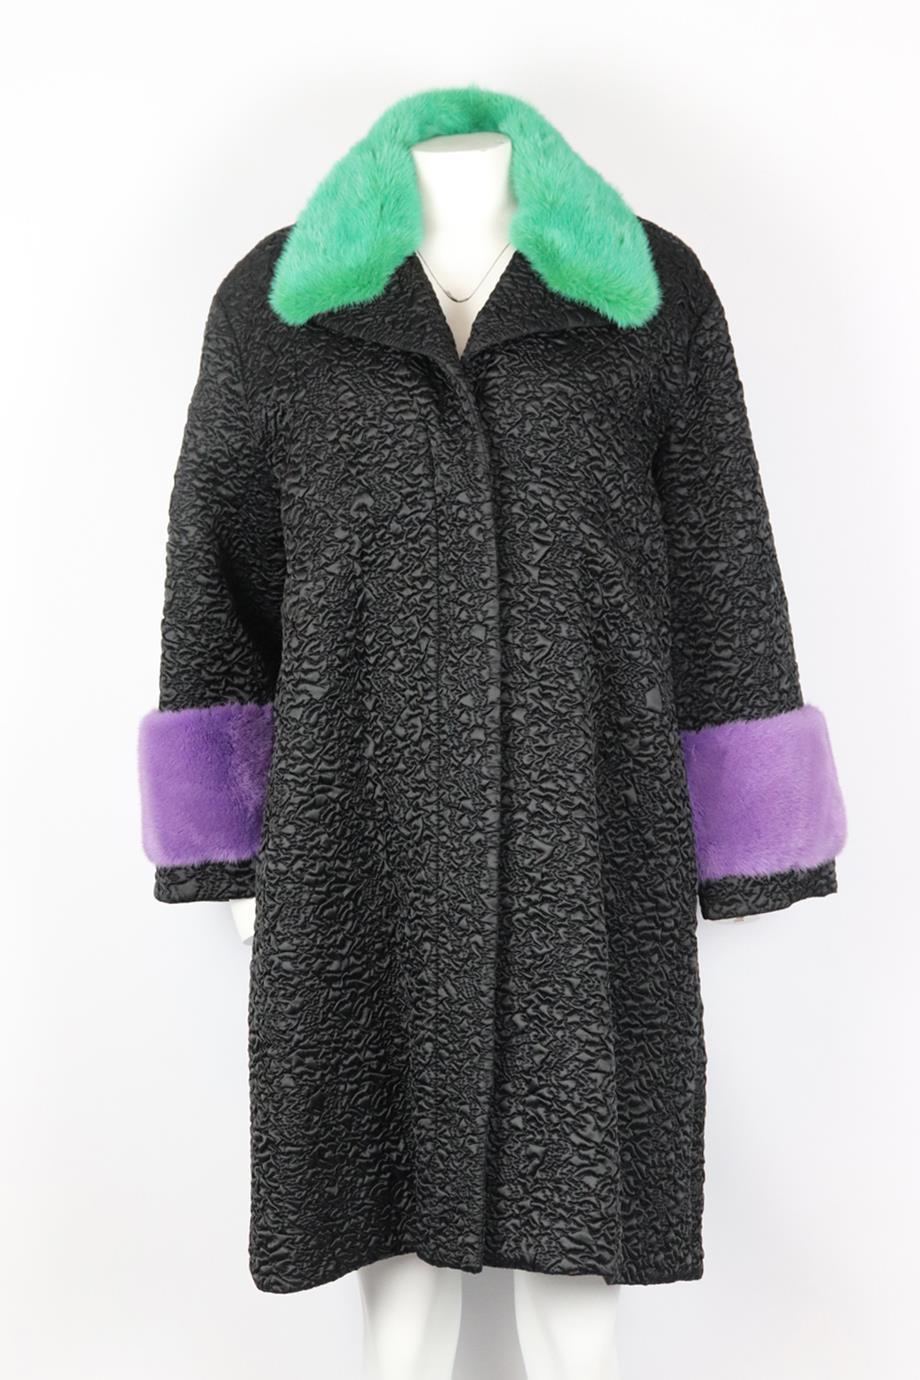 Gucci mink fur trimmed quilted shell coat. Black, purple and green. Long sleeve, v-neck. Zip fastening at front. 100% Polyamide; fabric2: 96% polyamide, 4% elastane; details: 100% mink fur; filling: 100% polyester; lining: 100% polyamide. Size: IT